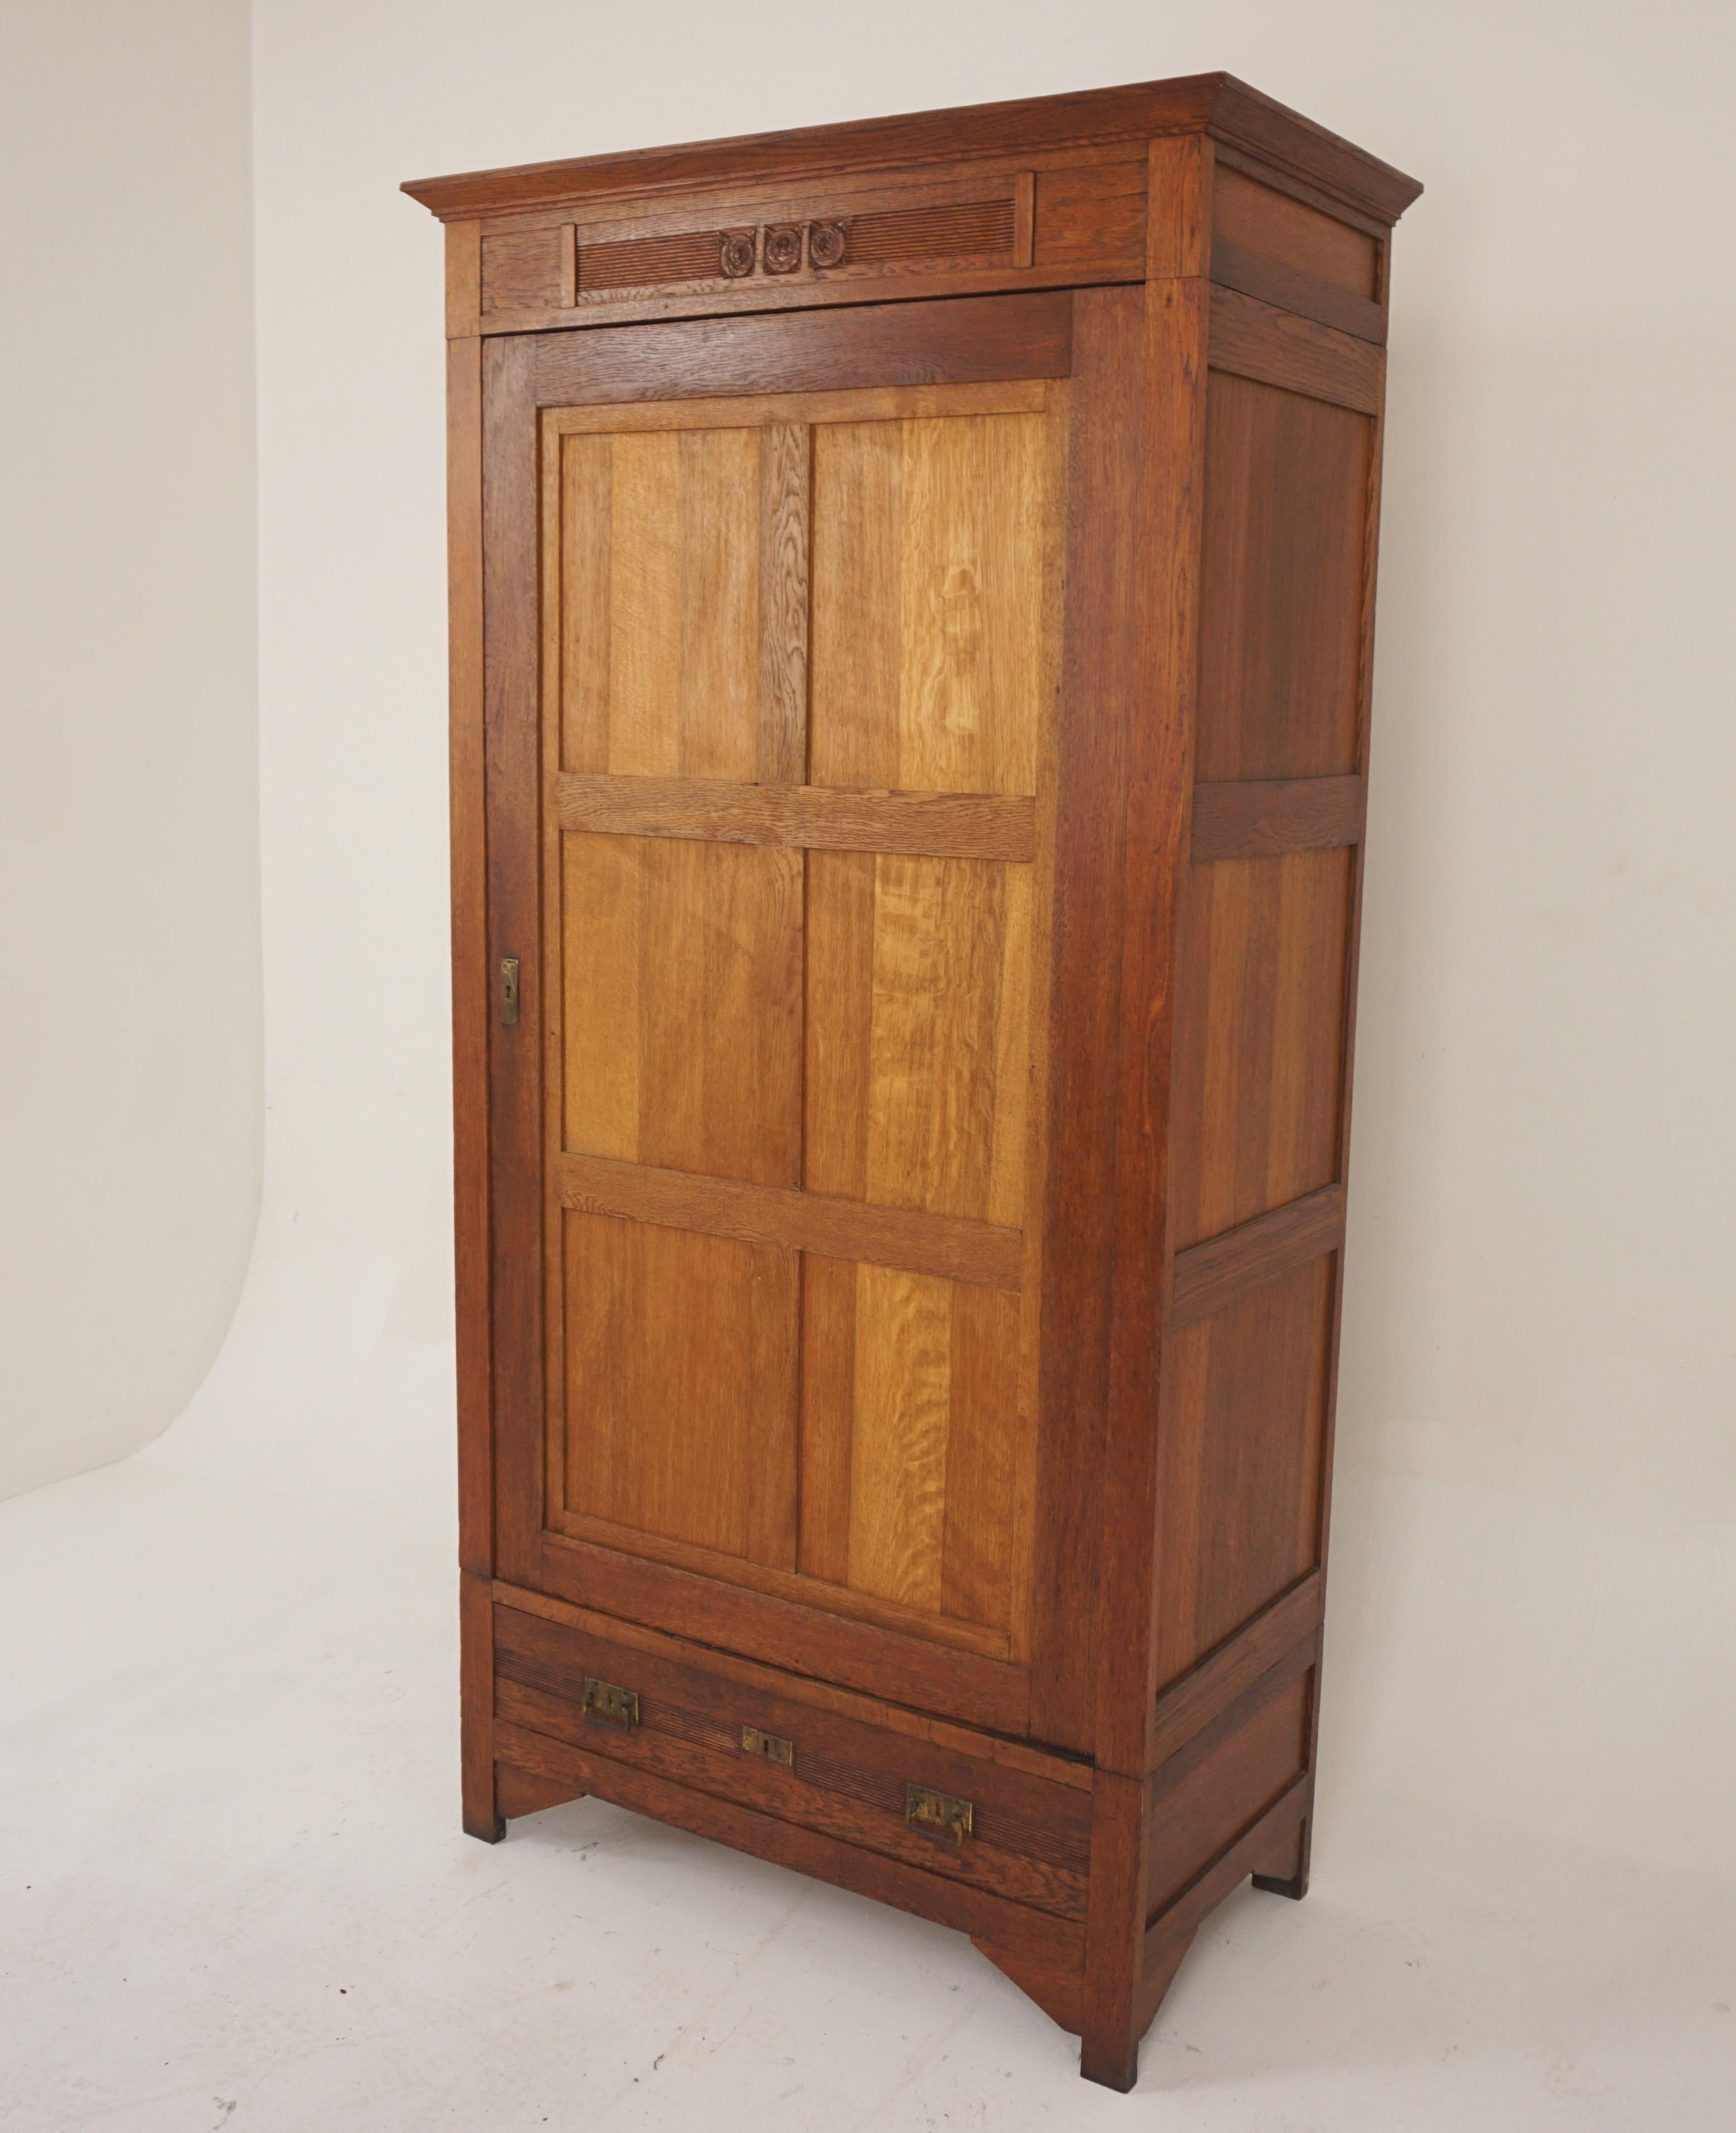 Antique French Oak Hall Robe, Wardrobe, Closet, Cupboard Arts & Craft. France 1910, H1199 

France 1910
Solid Oak
Original finish
Moulded cornice with carved front
Single six paneled oak door
Opens to reveal two loose shelves
Single drawer below